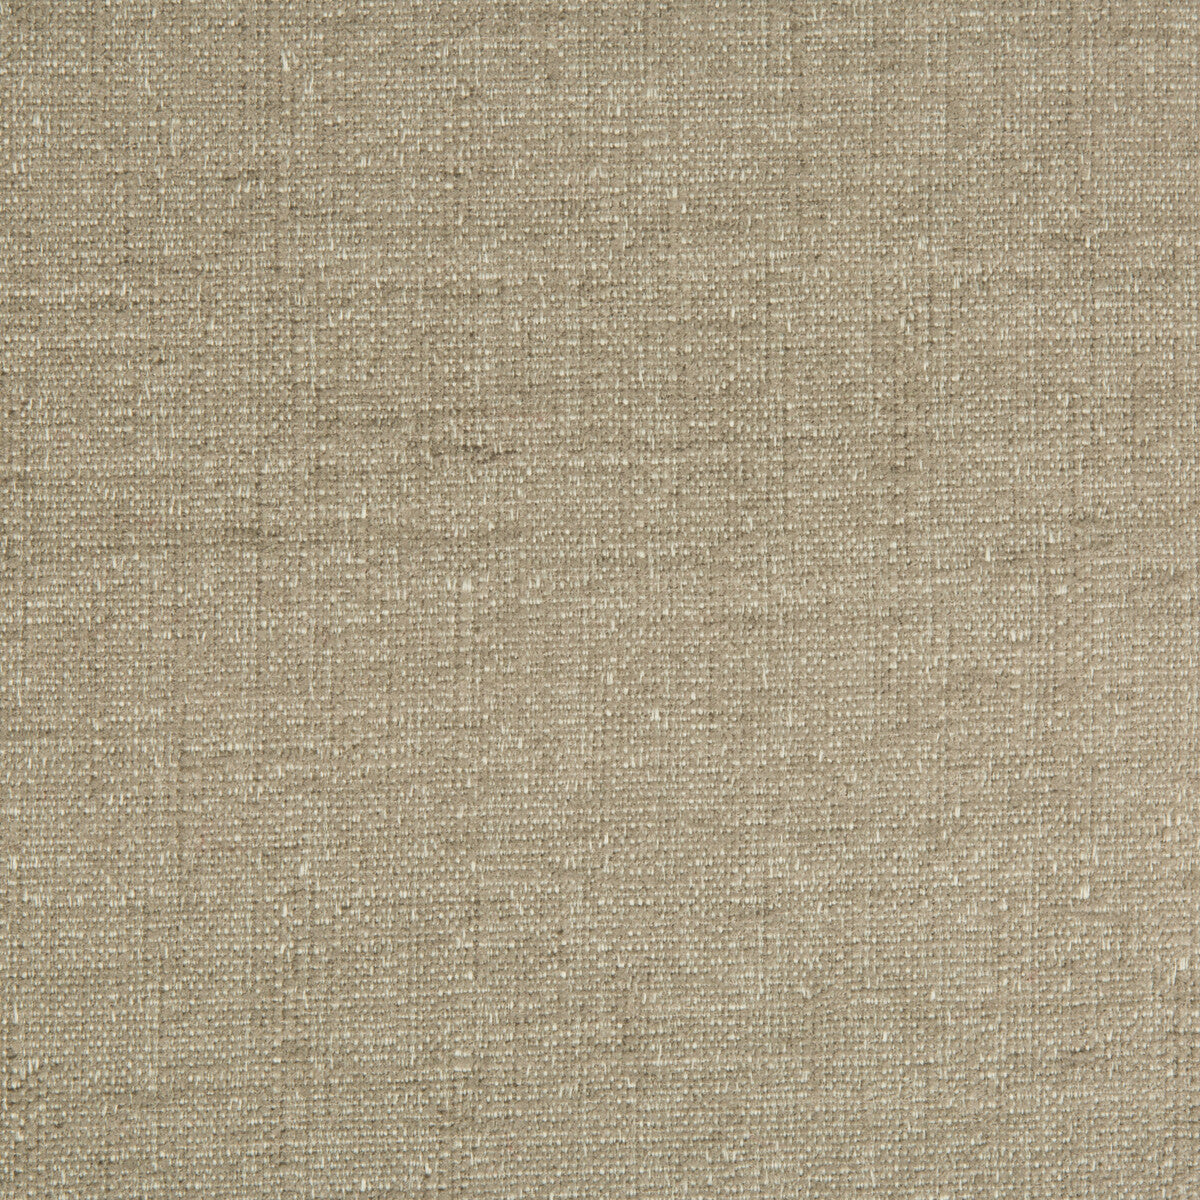 Kravet Contract fabric in 34636-11 color - pattern 34636.11.0 - by Kravet Contract in the Crypton Incase collection